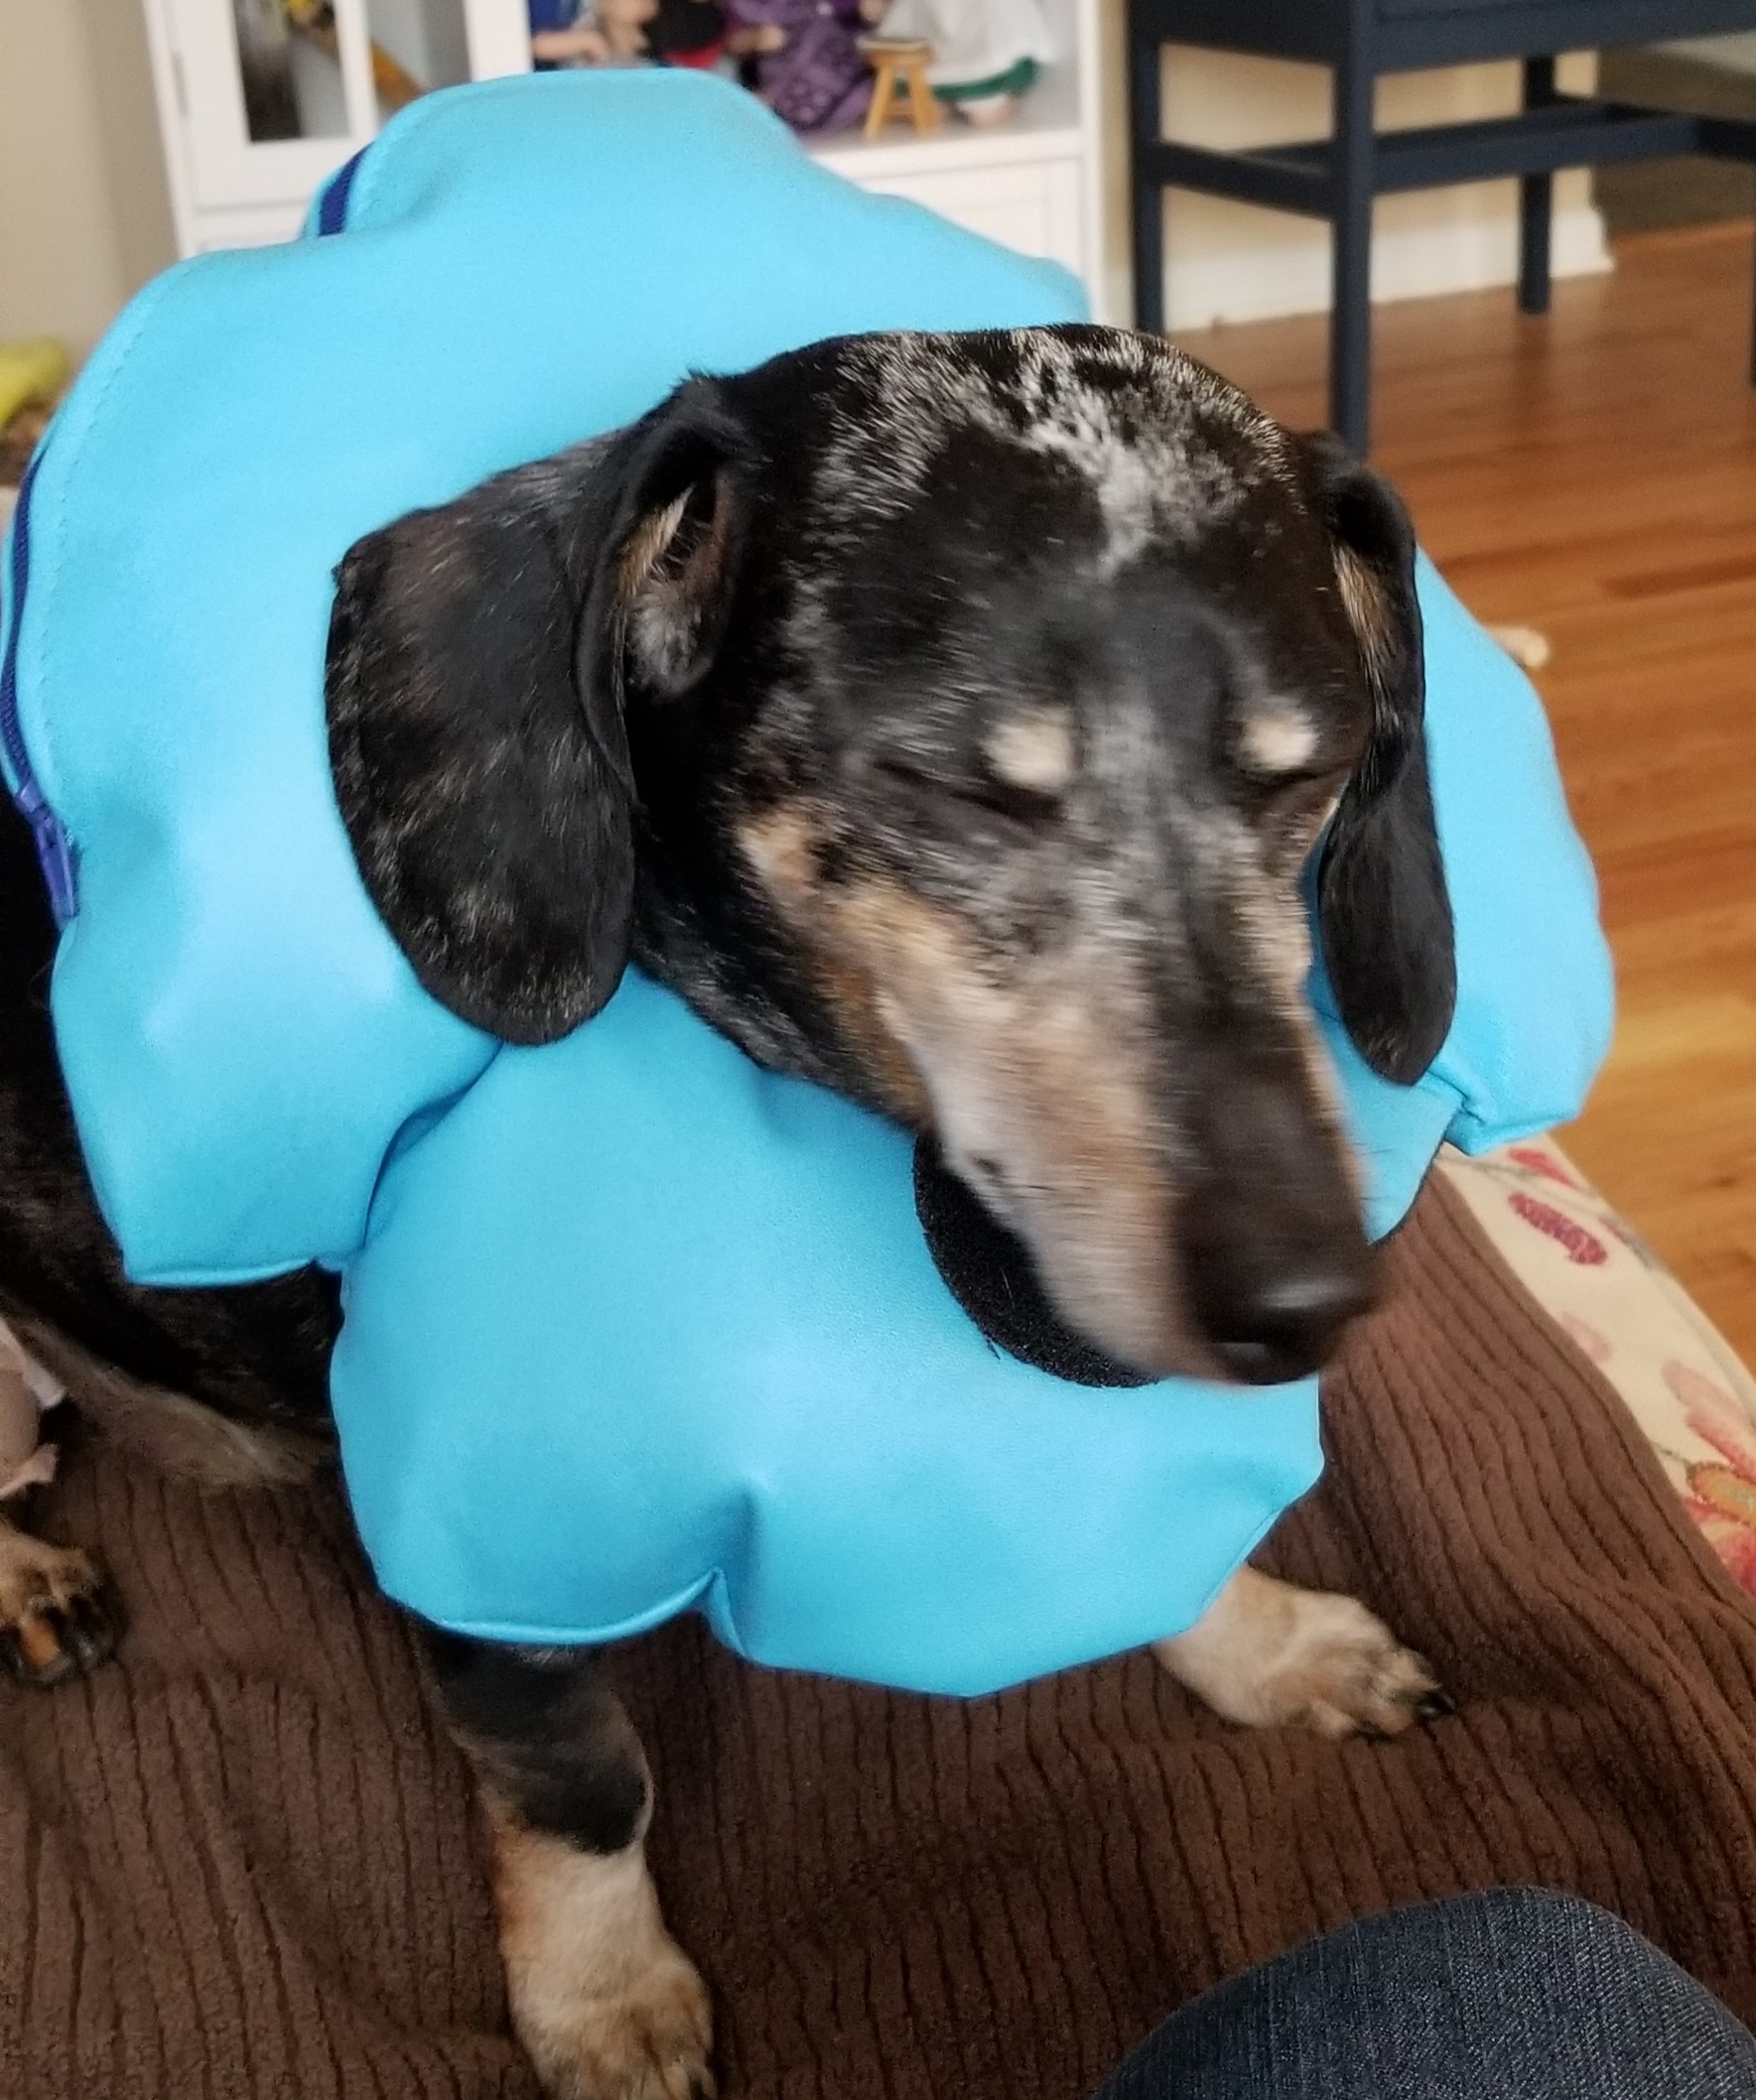 Photo of a little Dachshund with dappled fur of tan, black, and white on his head. He is closing his eyes for the photo, probably because he has to wear a puffy, bright blue "cone of shame" collar around his neck.